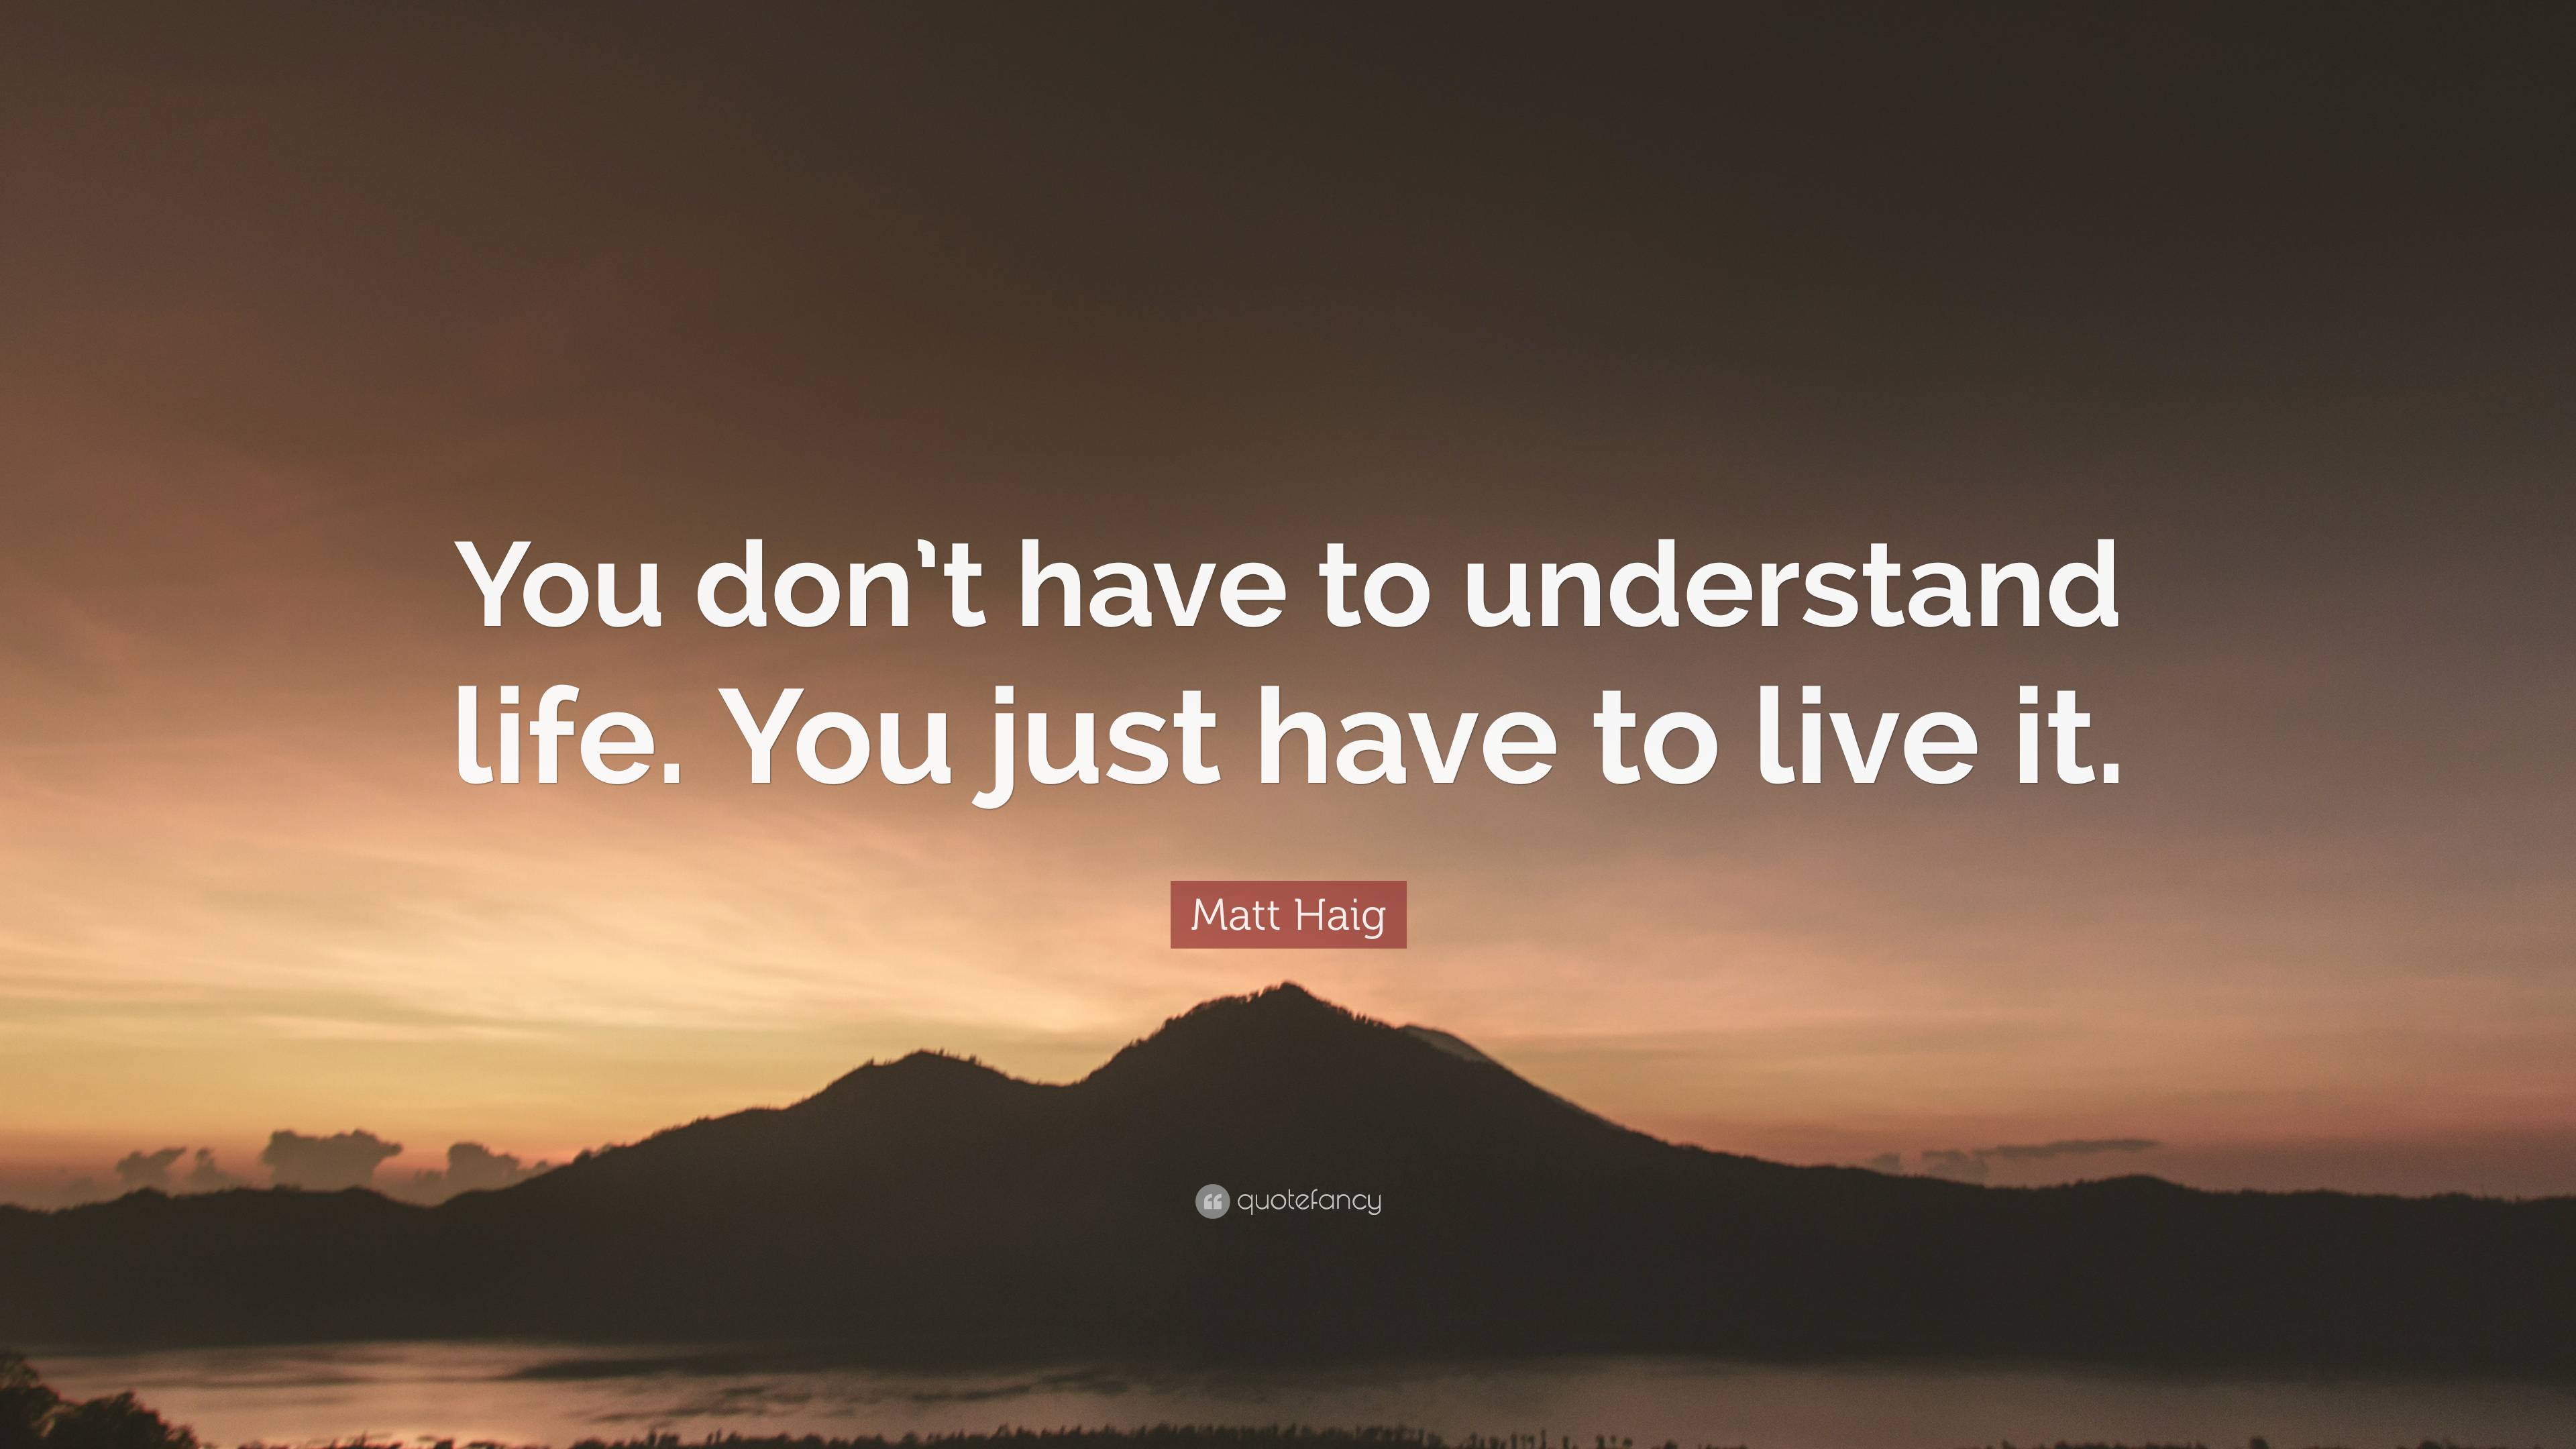 Matt Haig Quote: “You don’t have to understand life. You just have to ...